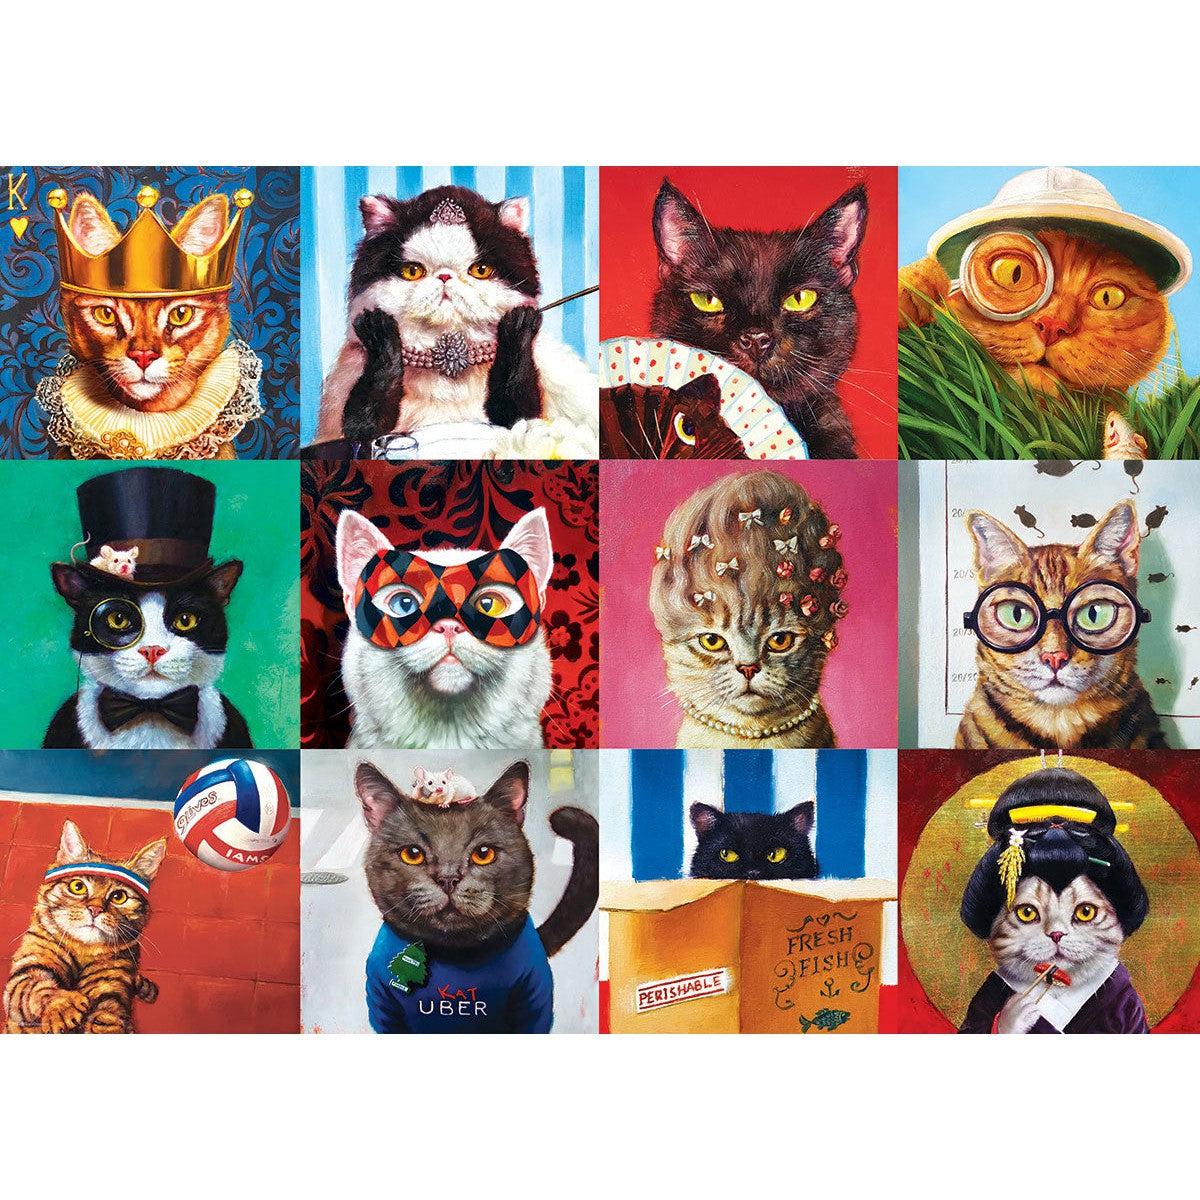 Funny Cats 1000 Piece Jigsaw Puzzle Eurographics